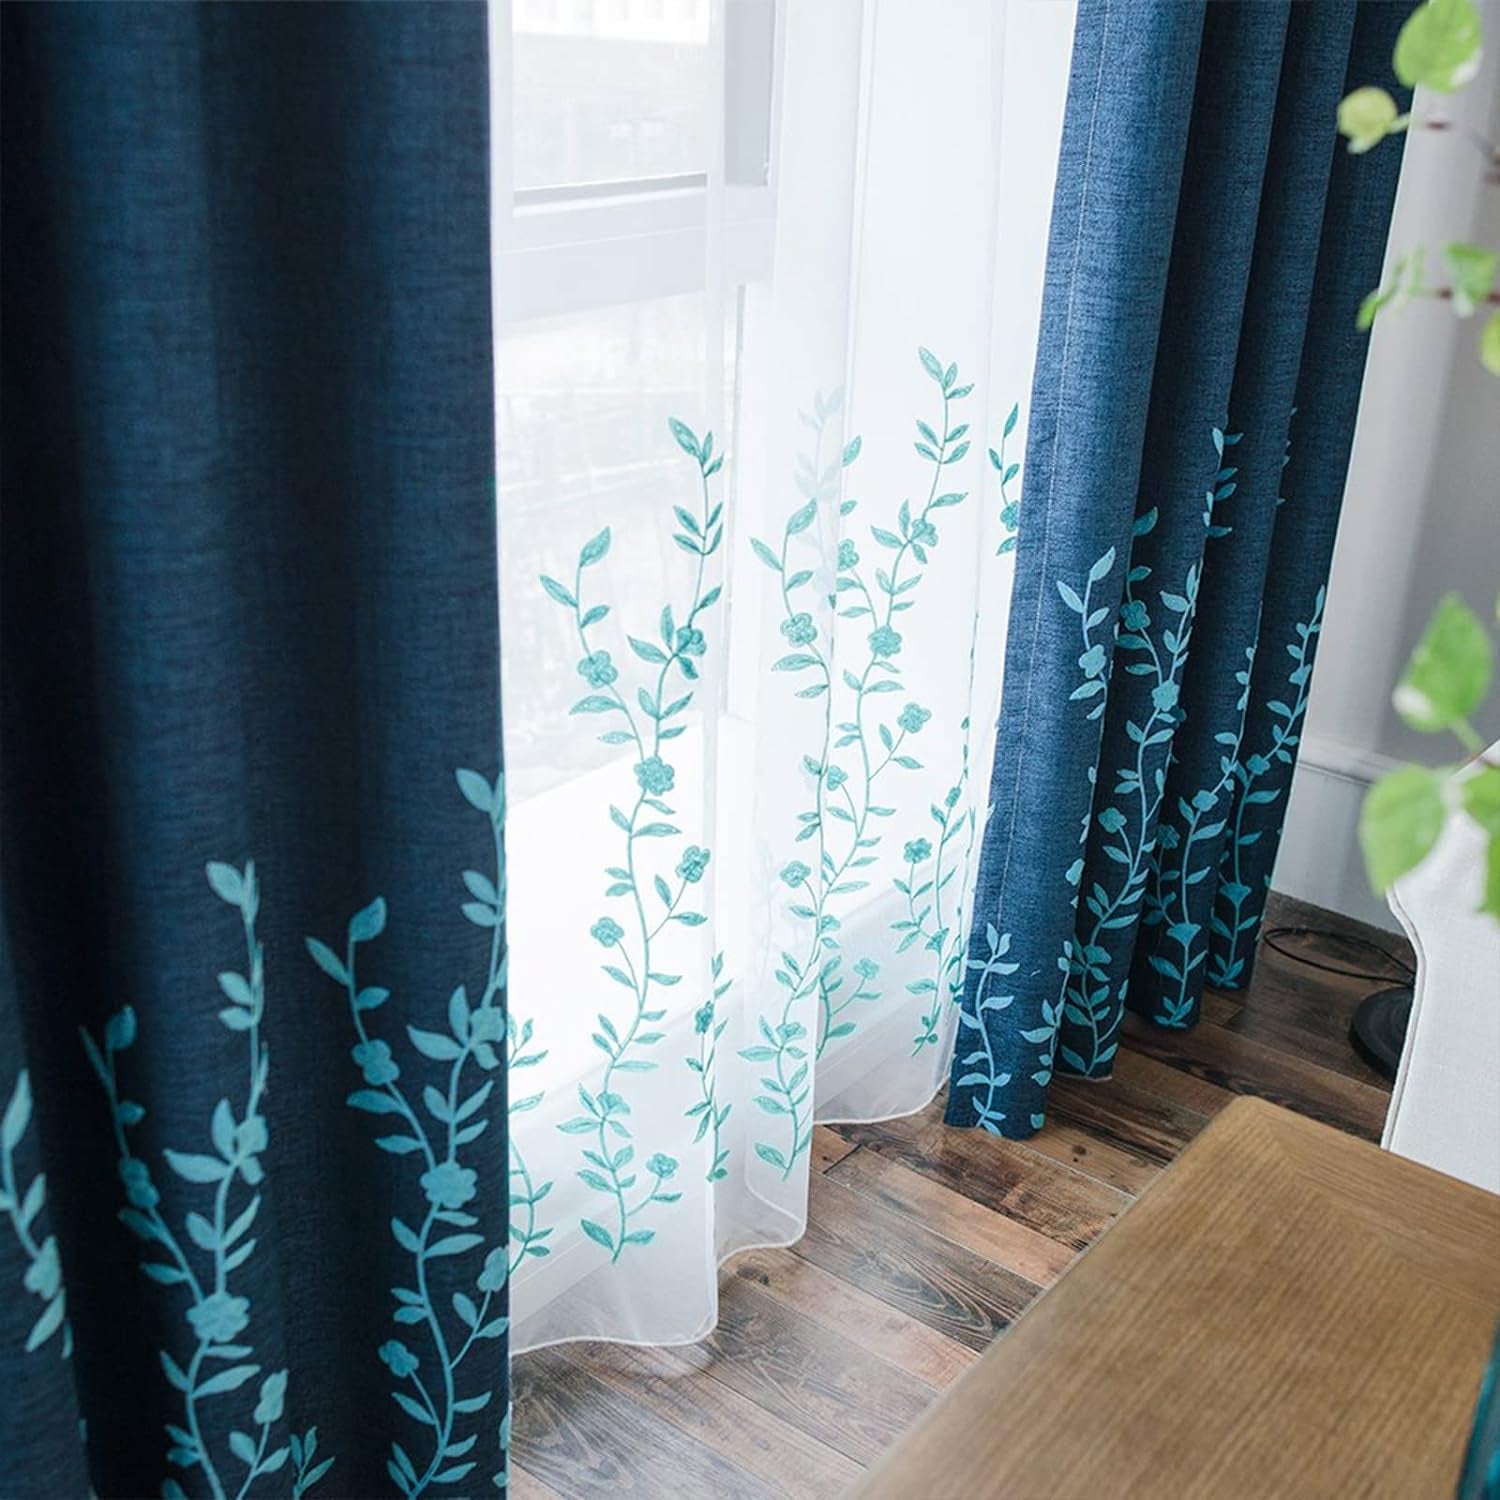 Melodieux Flower Embroidery Sheer Curtain for Living Room Patio Sliding Door Wide Window Rod Pocket Voile Drape, White/Blue, 100 by 84 Inch (1 Panel)  Melodieux   